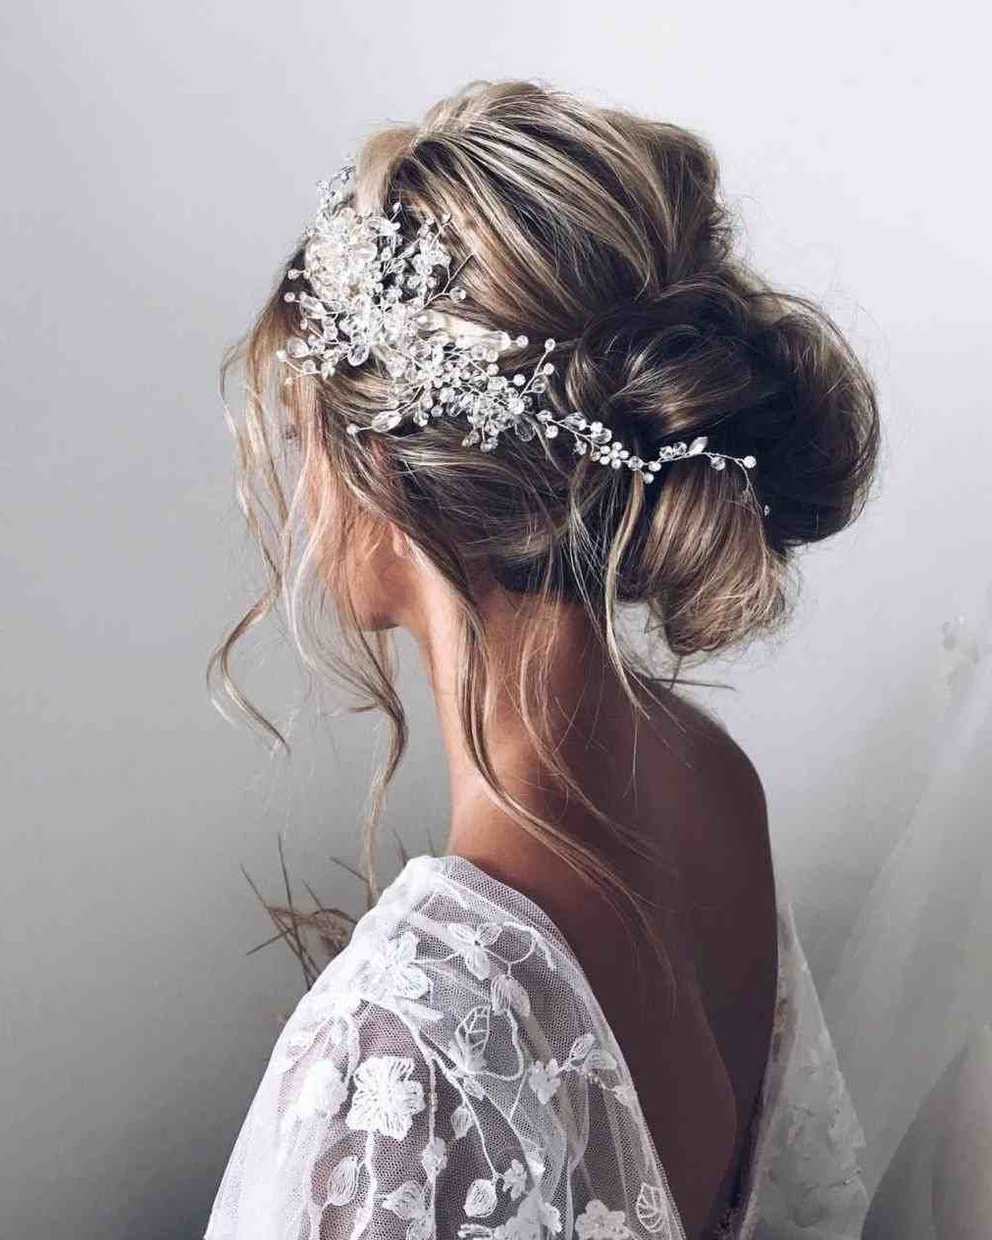 Relaxed Wedding Hairstyles Bohemian Updo Wedding Hair Bunulyana Throughout Recent Woven Updos With Tendrils For Wedding (Gallery 4 of 20)